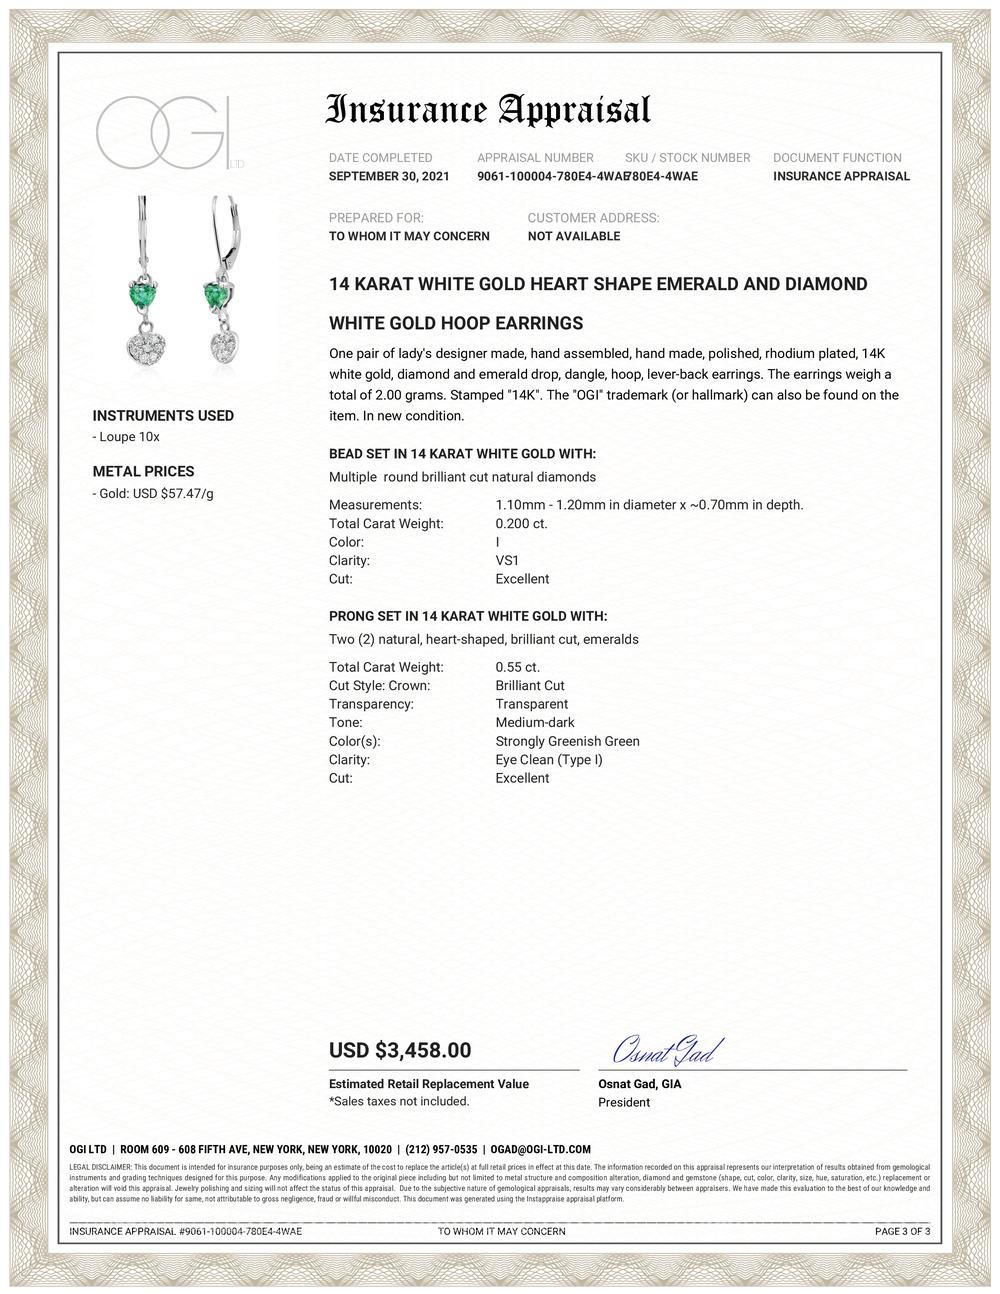 Fourteen karats white gold hoop drop earrings 
Diamonds weighing 0.20 carat 
Two heart shape emeralds weighing 0.55 carats
One of a kind earring
New Earrings
14 karat gold wire wrapped hoops 
Handmade in the USA
Our team of graduate gemologists